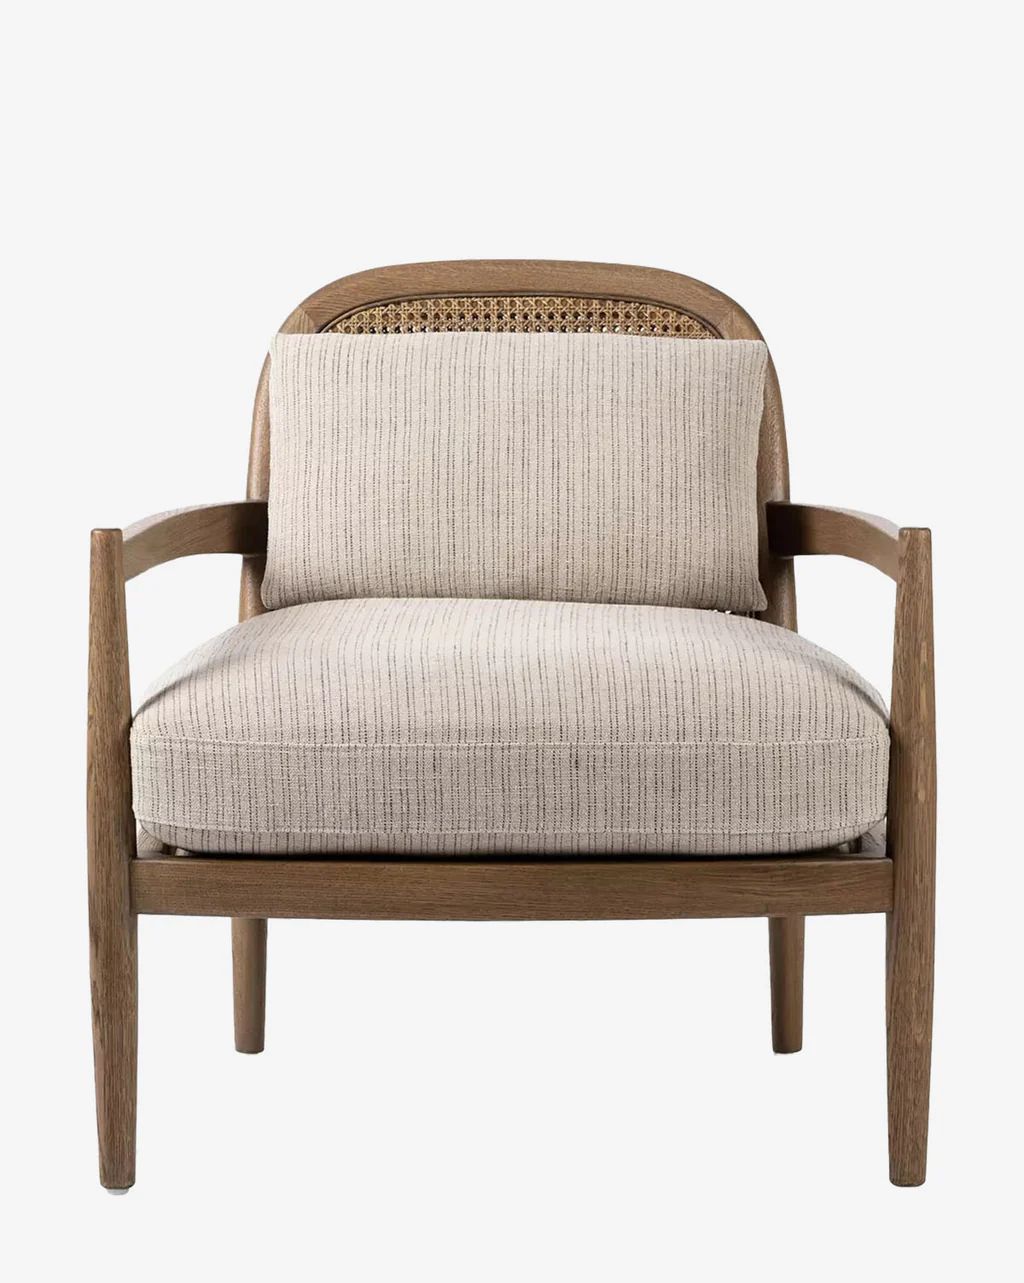 Manning Chair | McGee & Co.